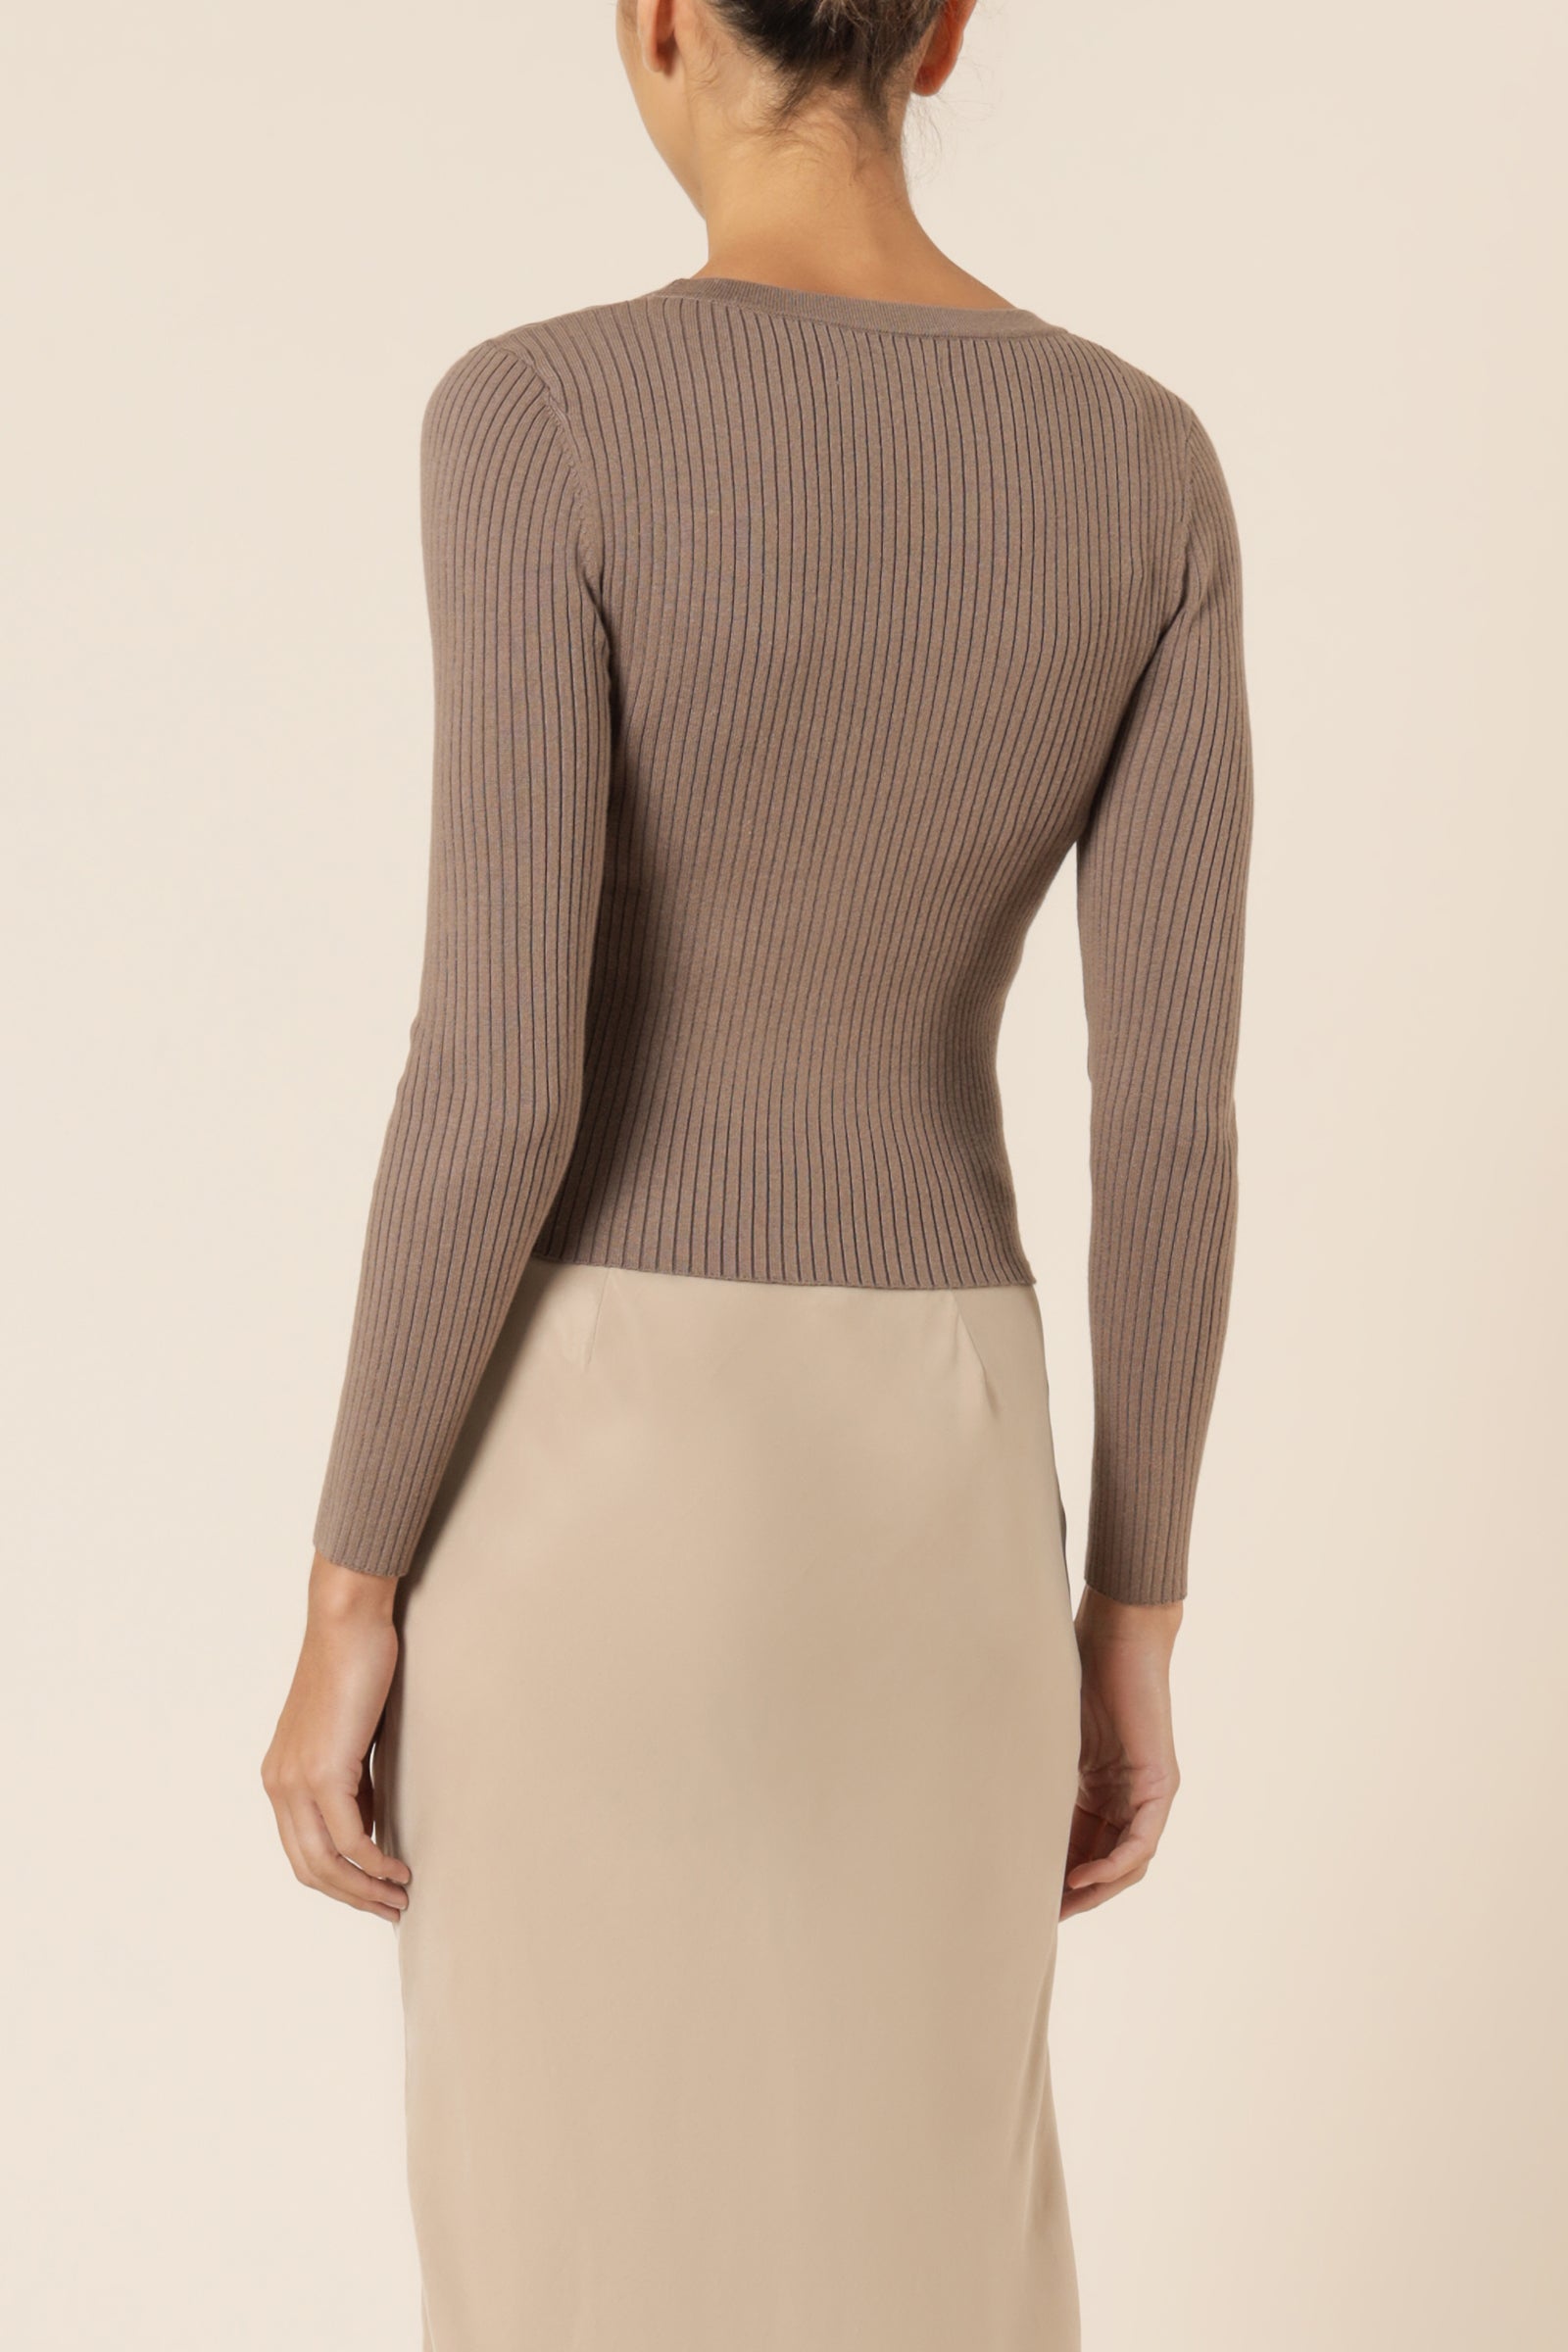 Nude Lucy nude classic knit cardi chocolate knits